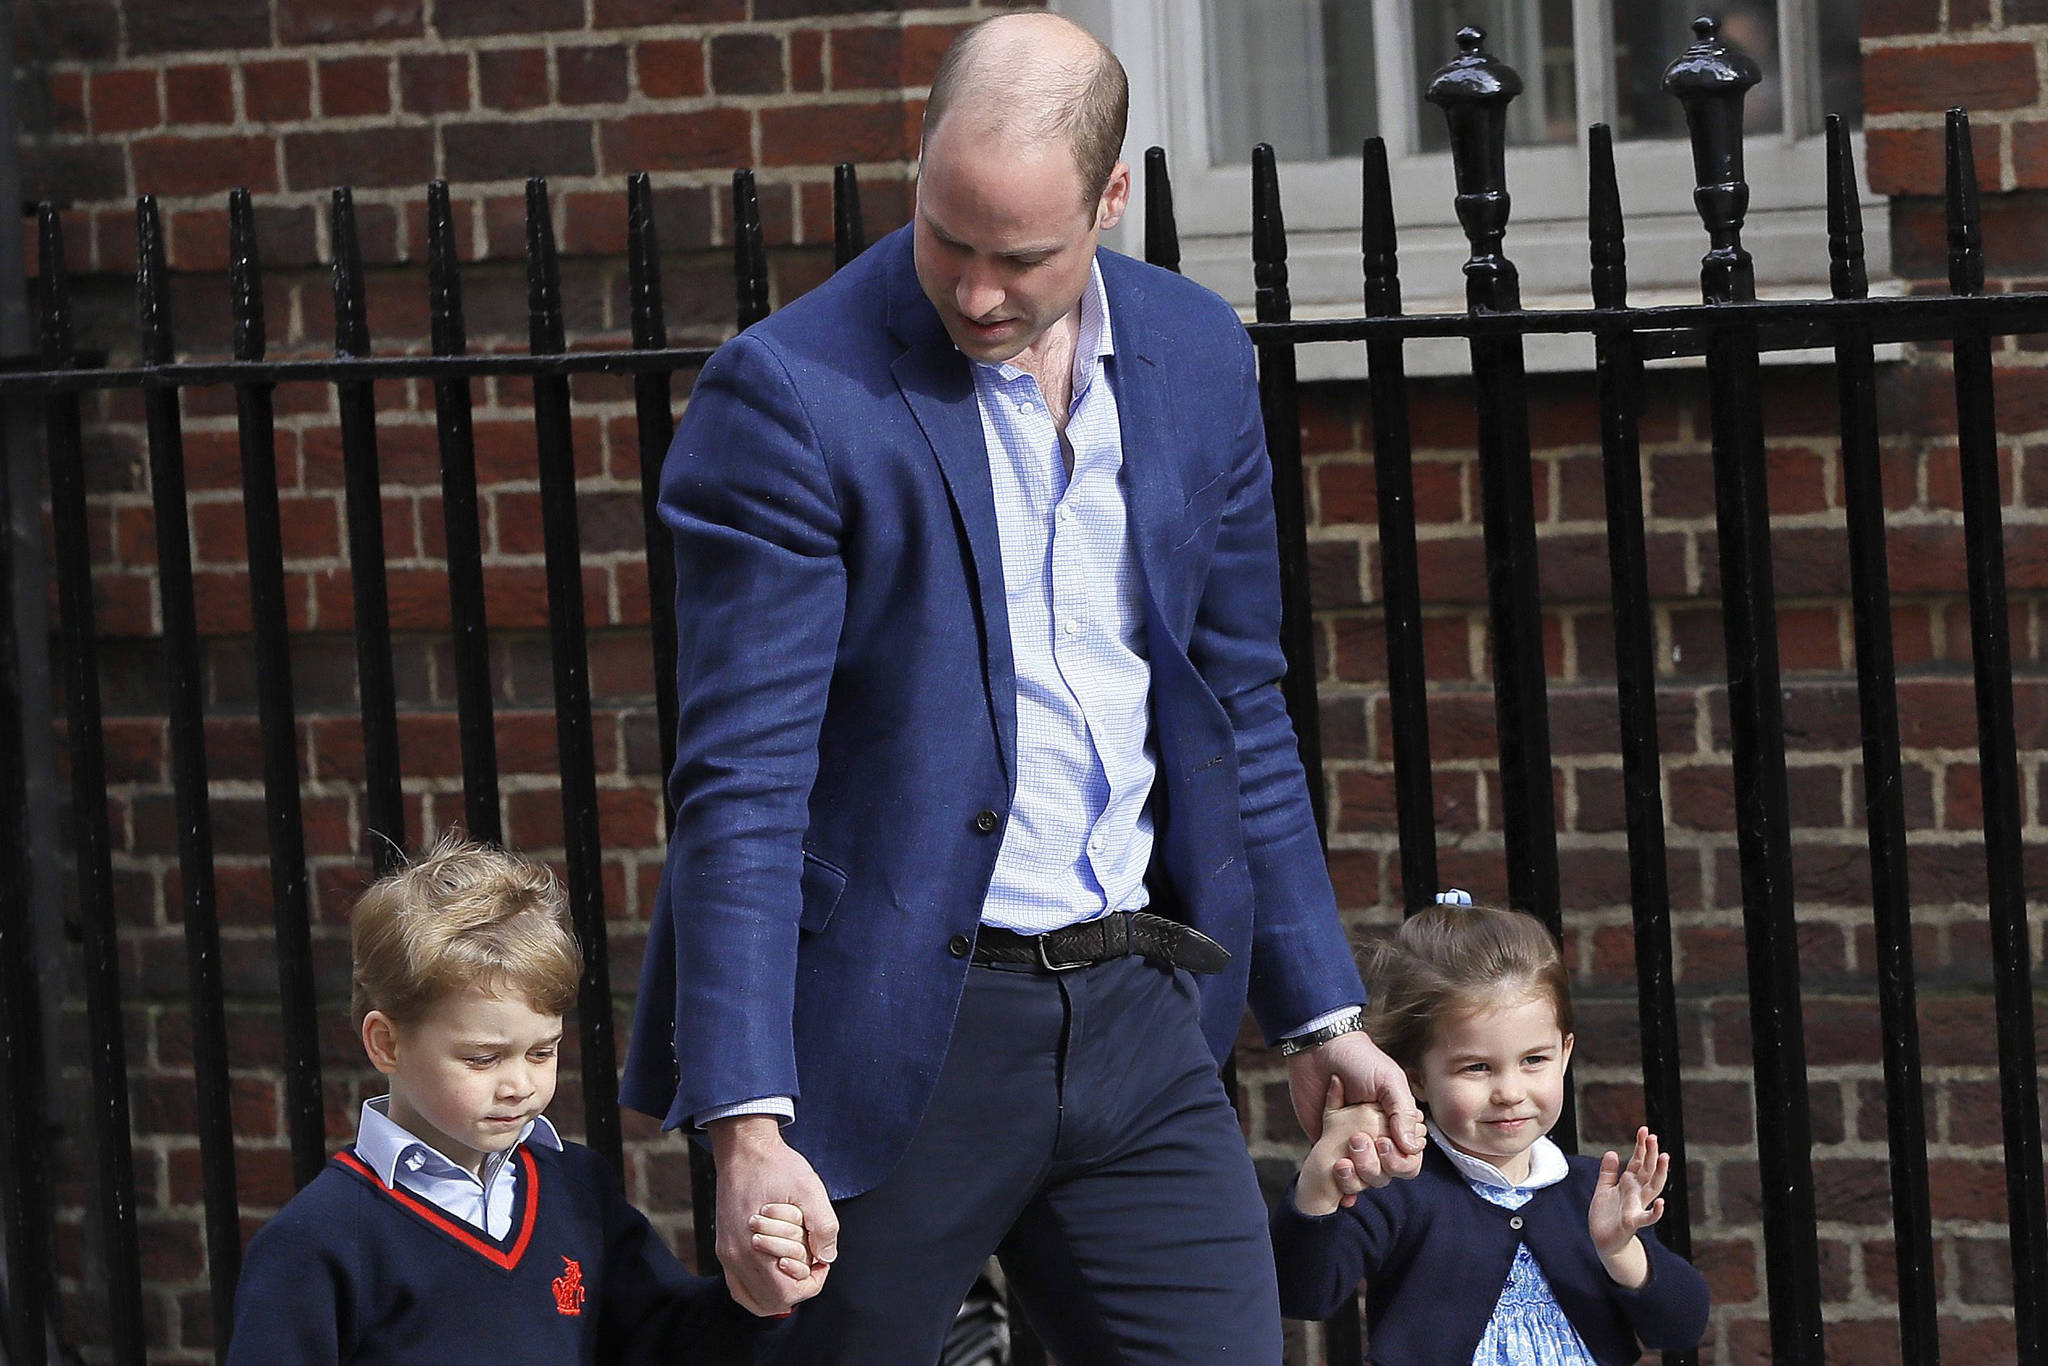 Britain’s Prince William arrives with Prince George and Princess Charlotte back to the Lindo wing at St Mary’s Hospital in London London, Monday, April 23, 2018. (AP Photo/Kirsty Wigglesworth)